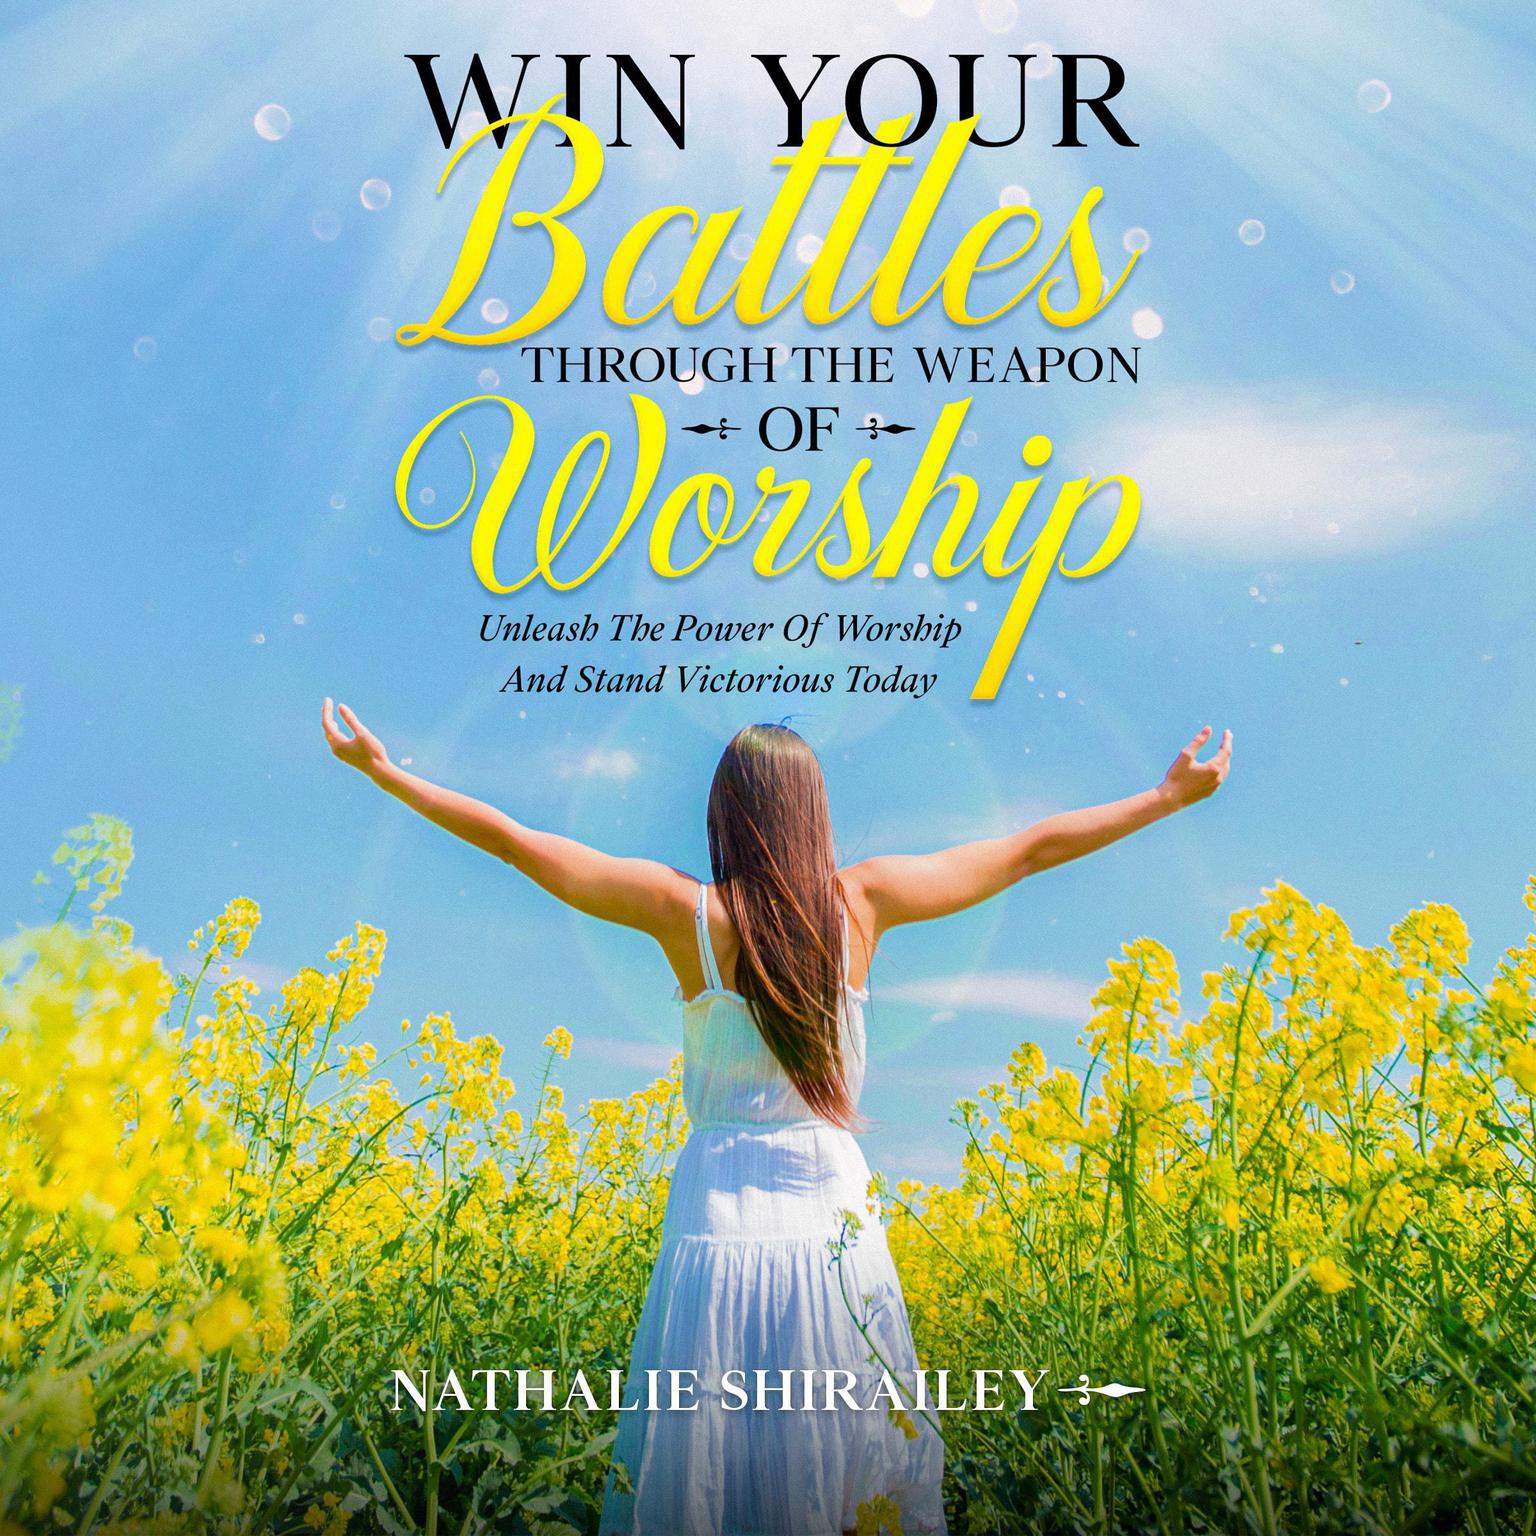 Win Your Battles Through The Weapon Of Worship (Abridged): Unleash The Power Of Worship And Stand Victorious Today Audiobook, by Nathalie Shirailey